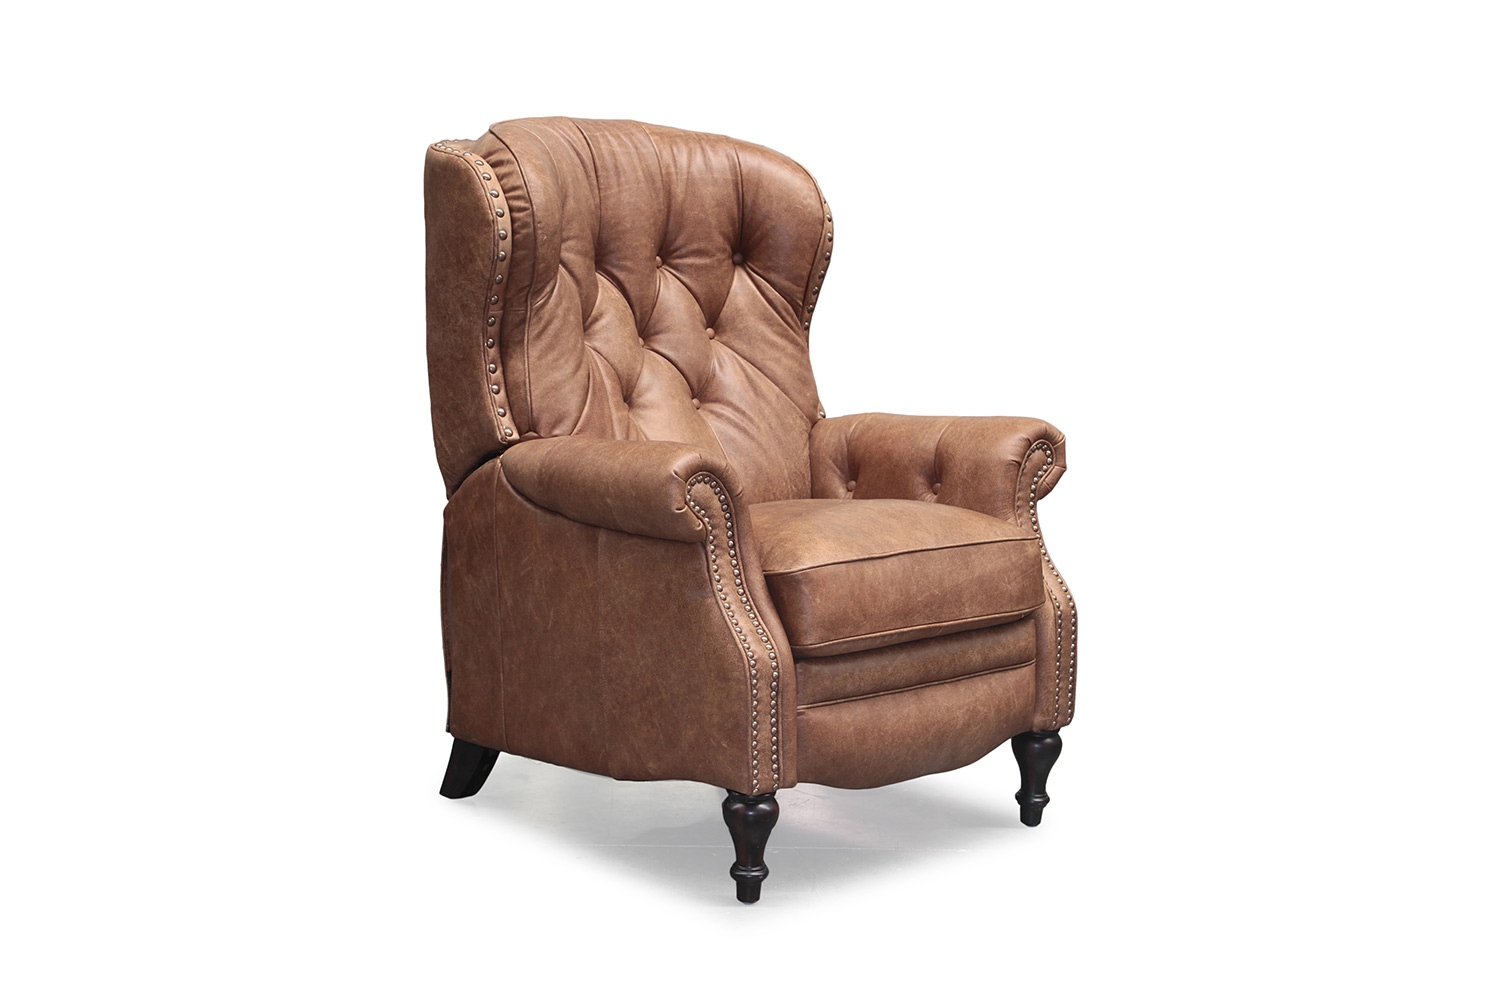 Barcalounger KendAll Recliner Chair - Sanded Bomber/All top grain Leather